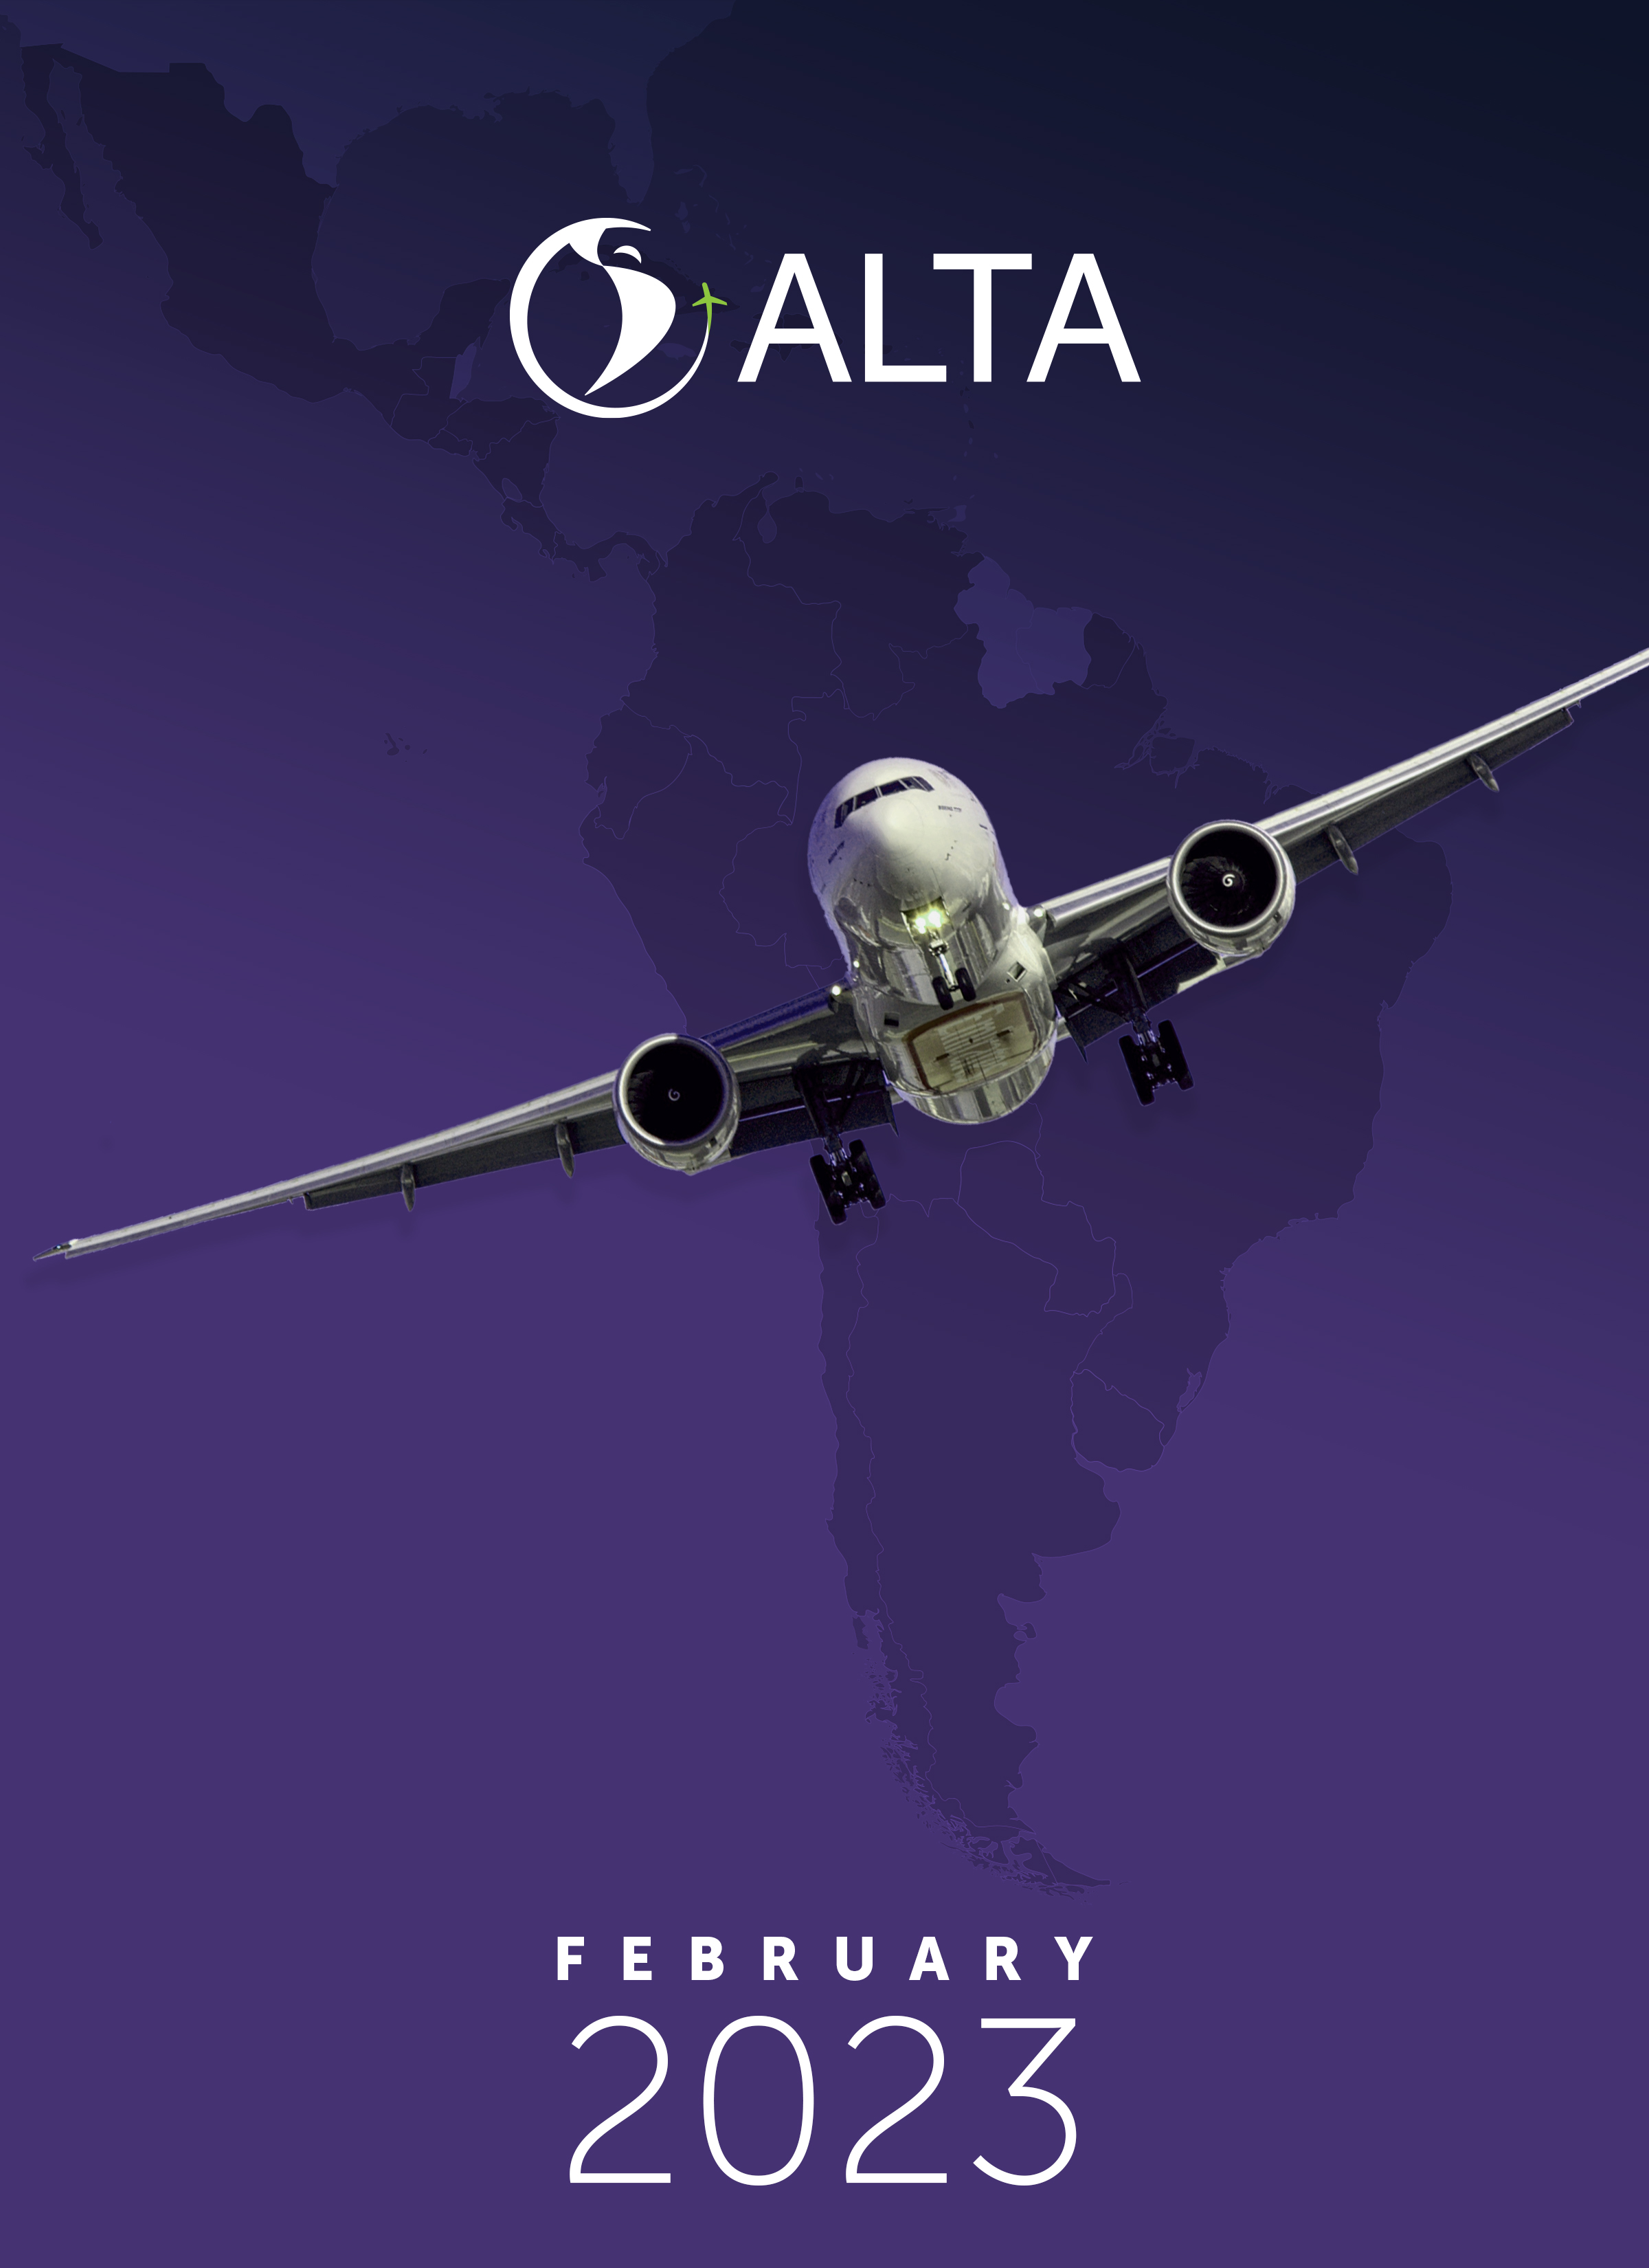 ALTA NEWS - LAC drops to third place in global passenger traffic recovery